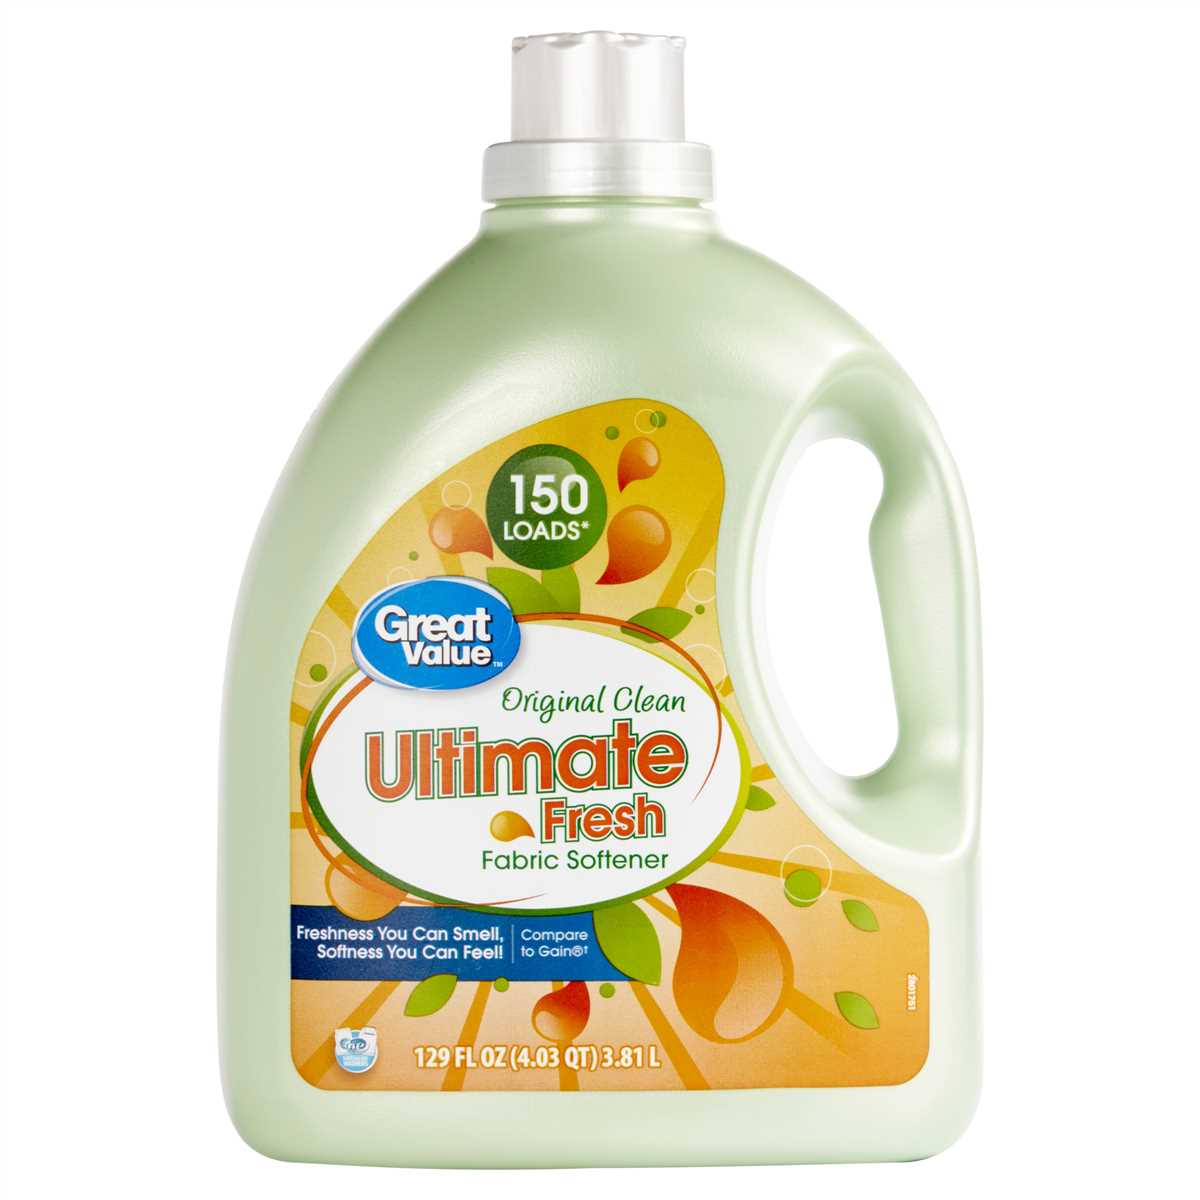 Top Fragrance Options for Fabric Softeners